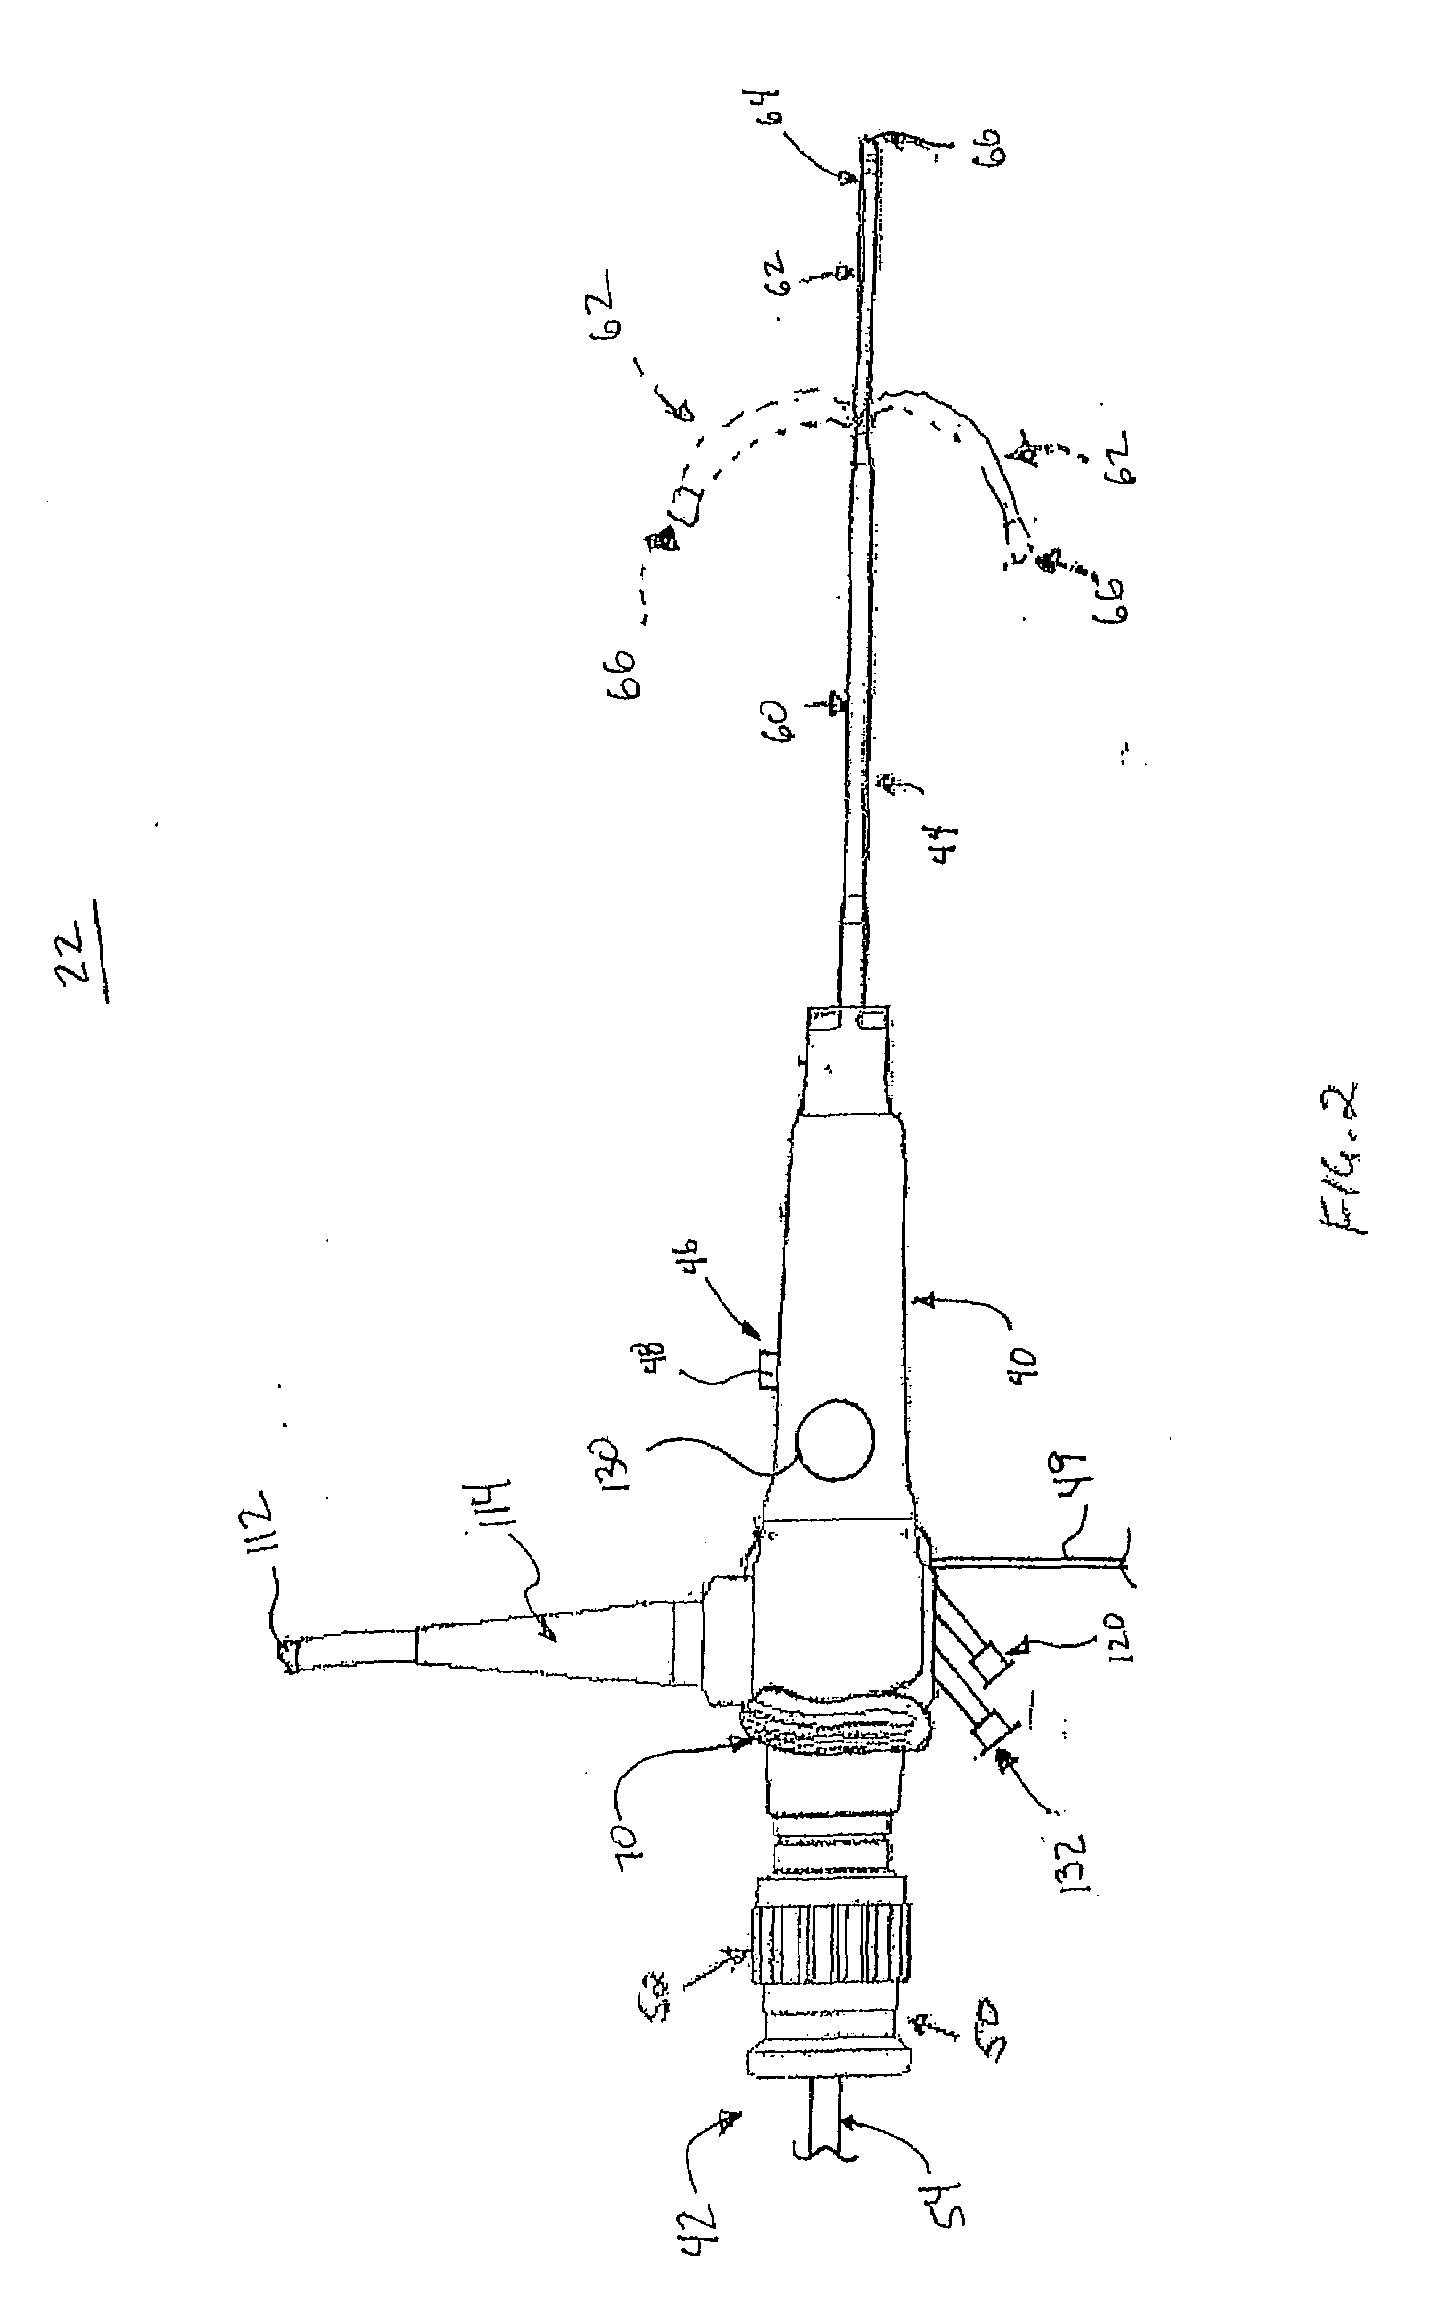 Systems and methods for biofilm removal, including a biofilm removal endoscope for use therewith